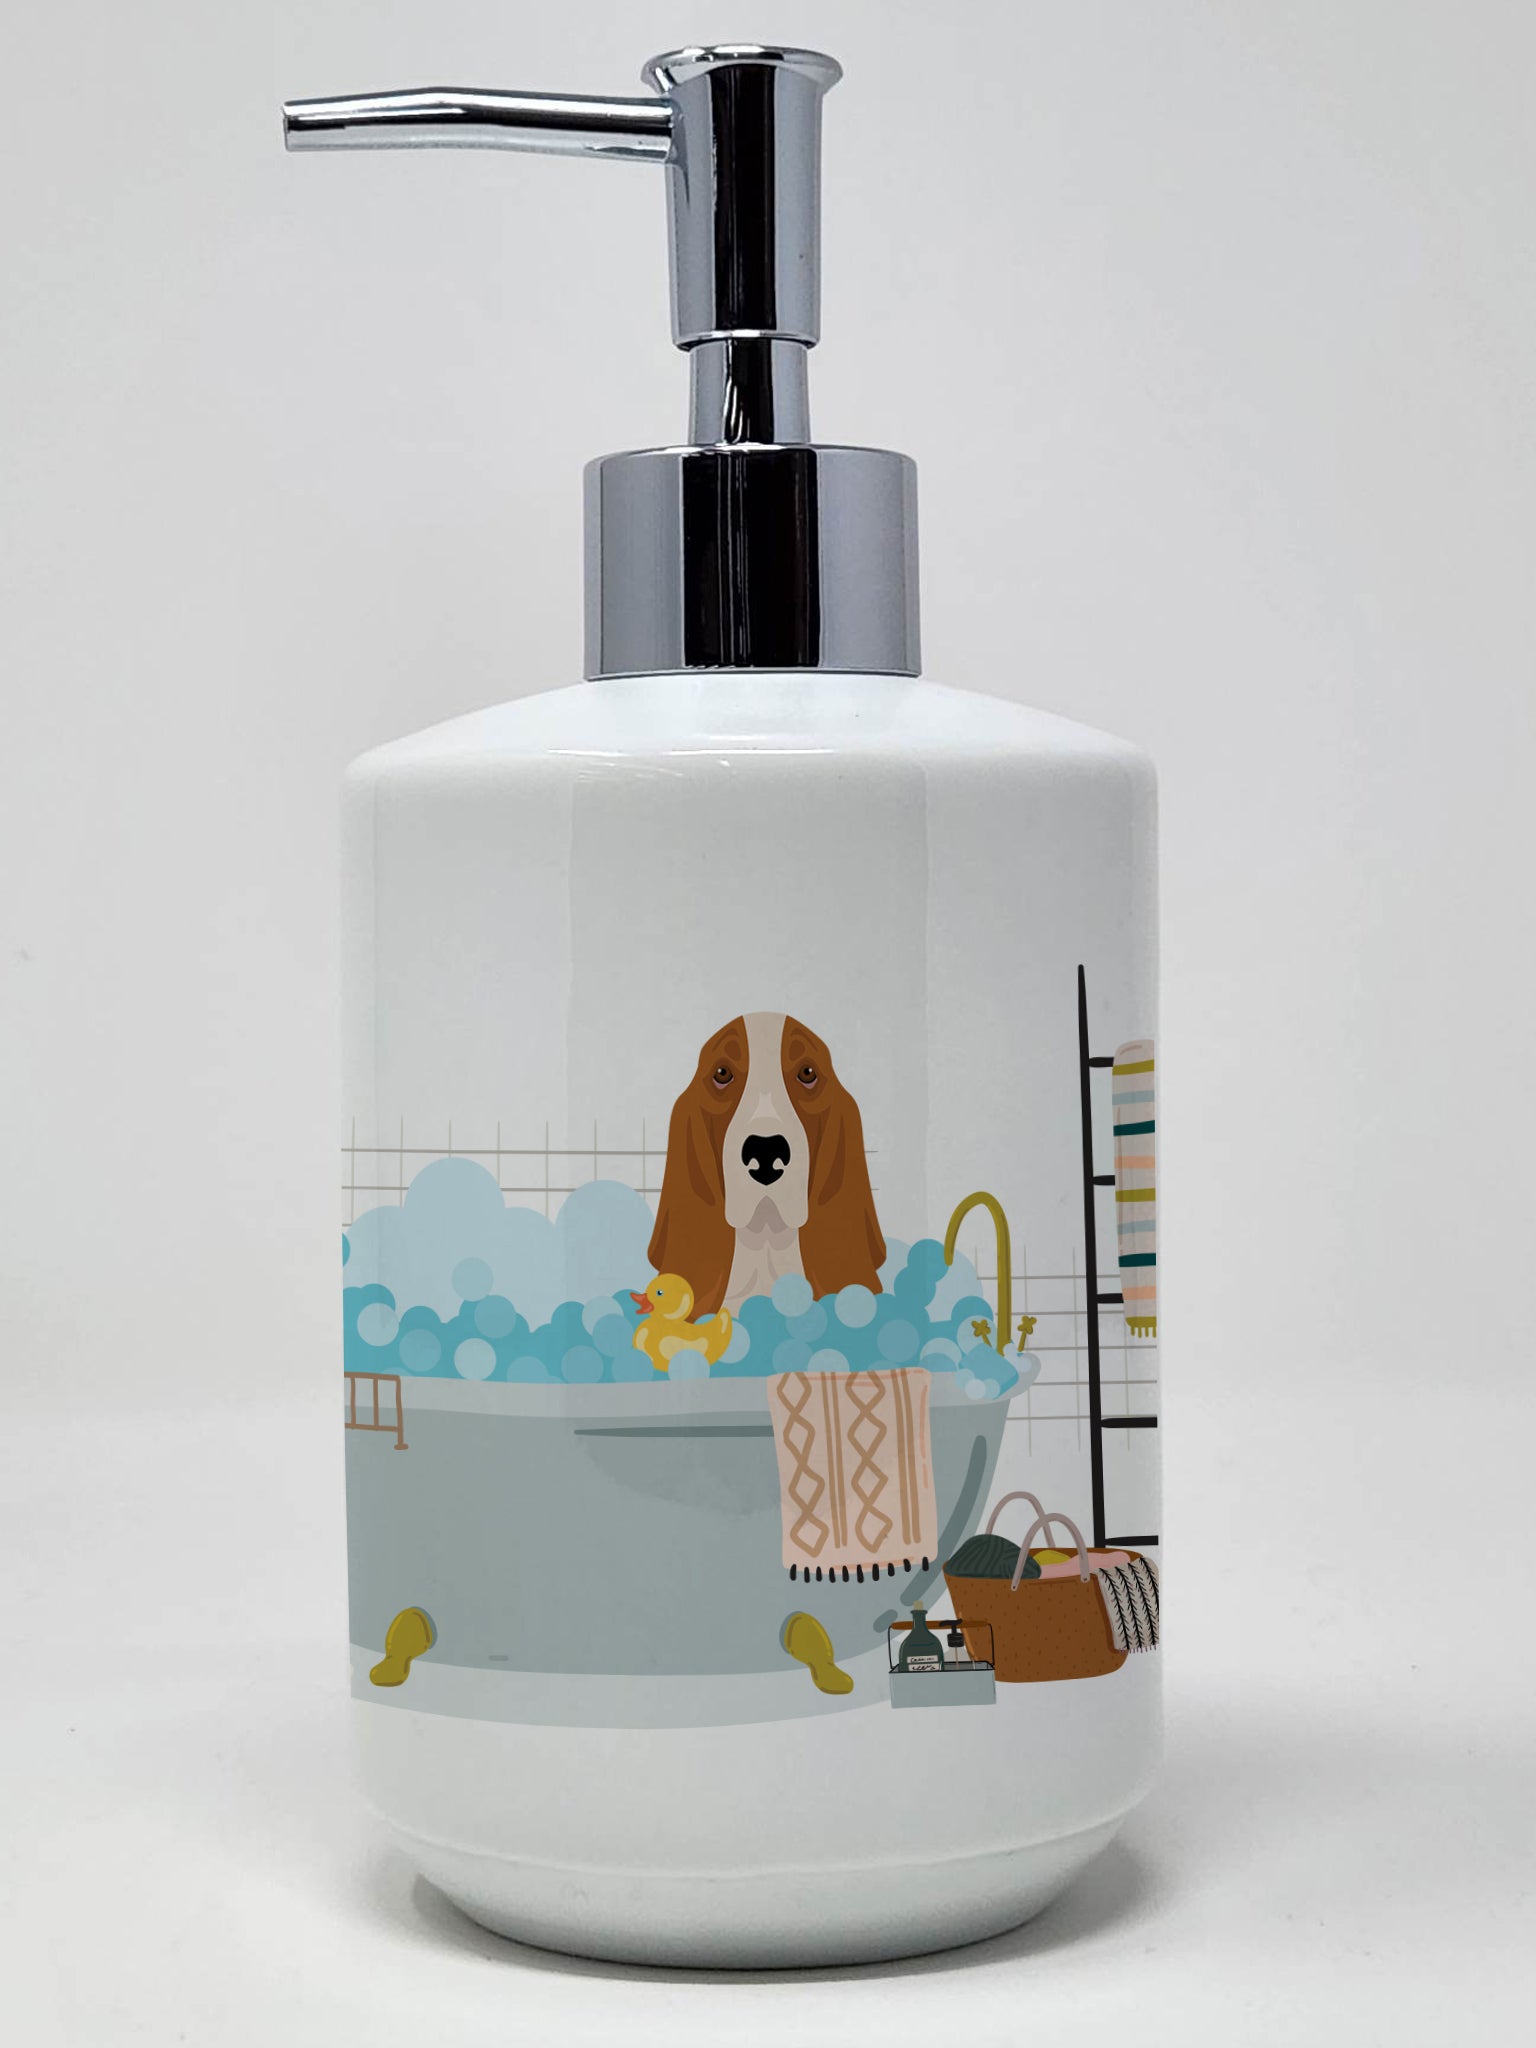 Buy this Red and White Tricolor Basset Hound Ceramic Soap Dispenser